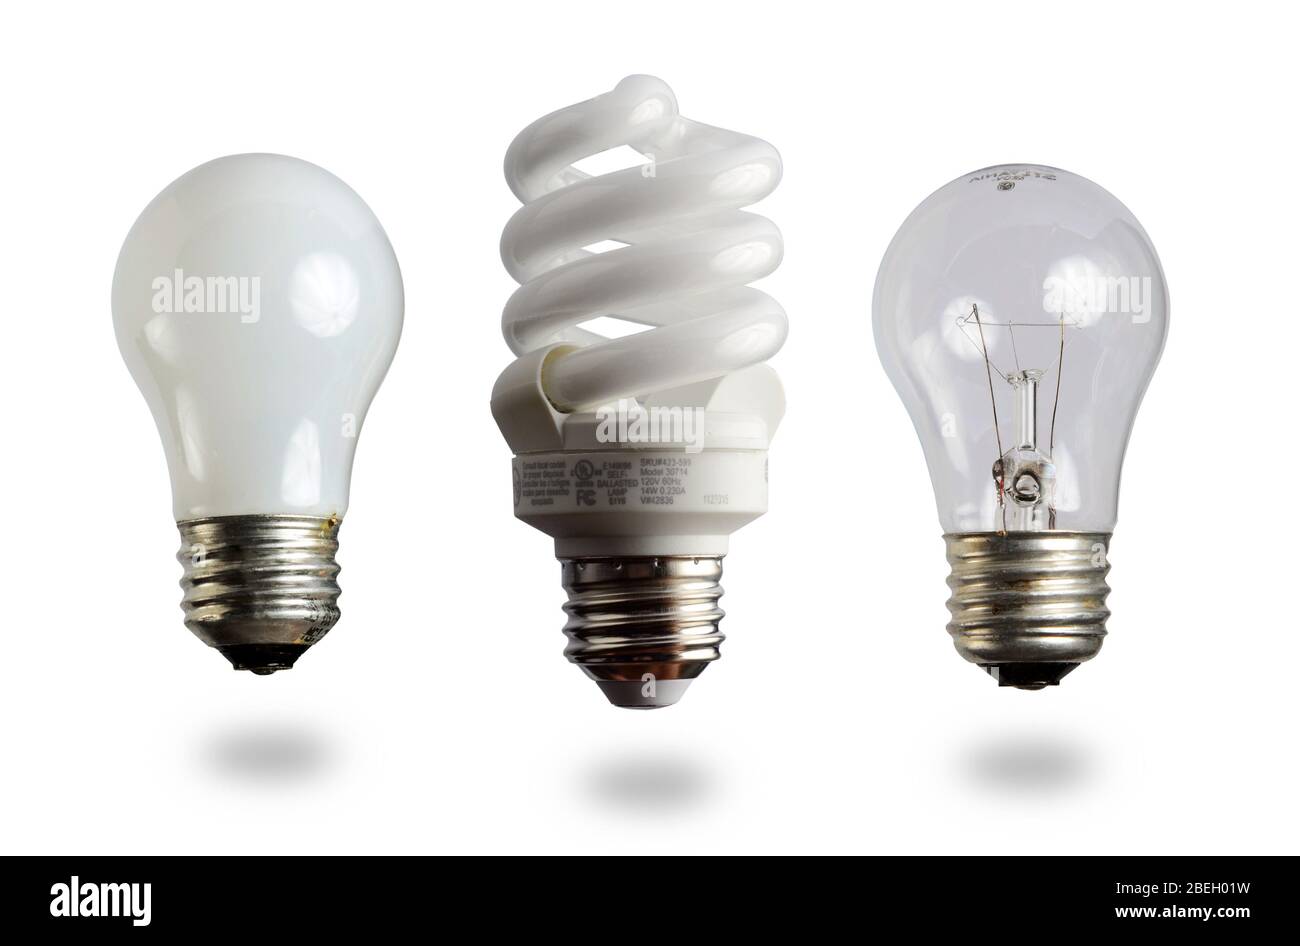 Incandescent and Compact Fluorescent Light Bulbs Stock Photo